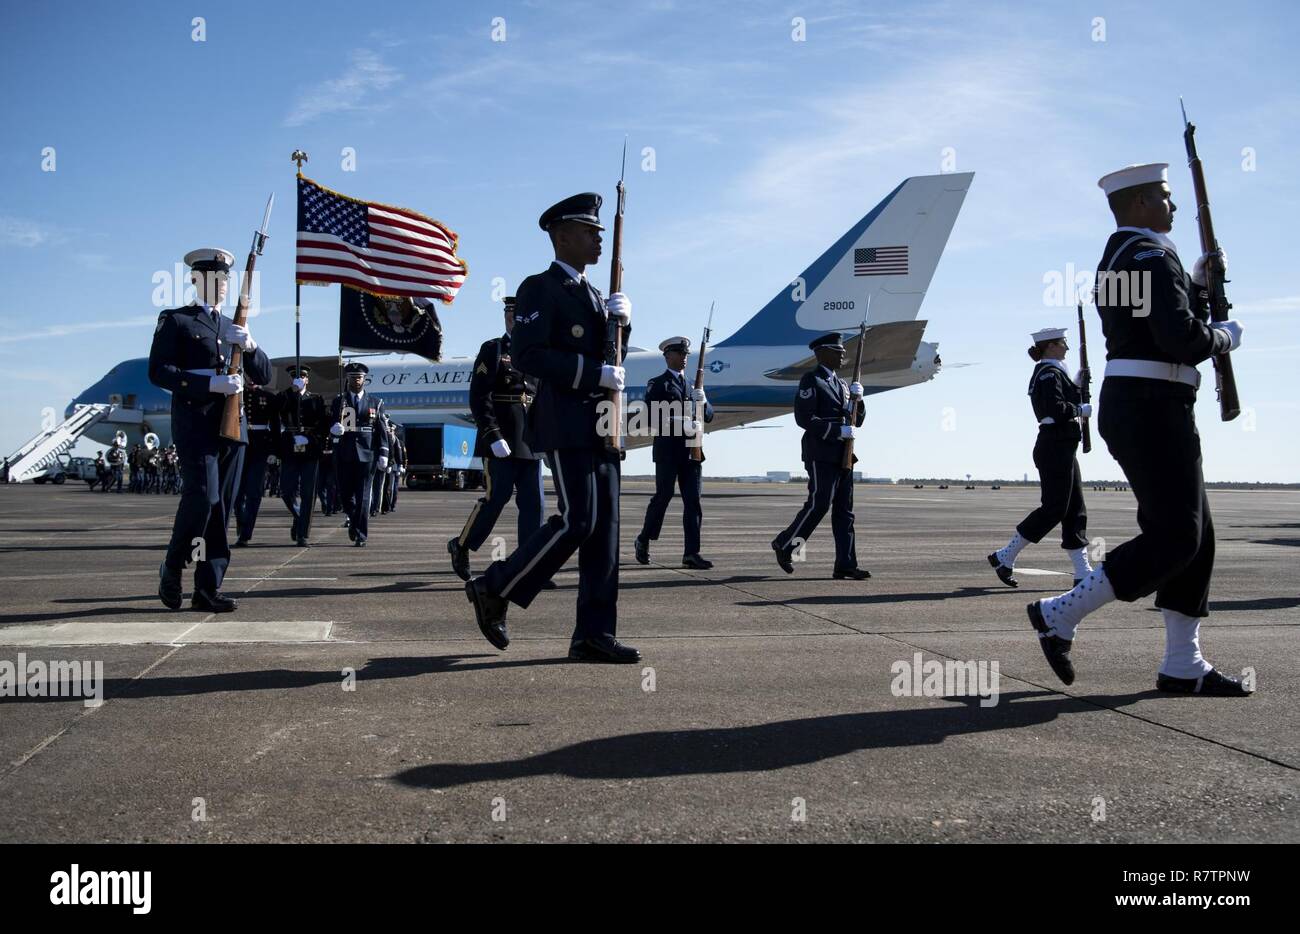 U.S. service members with the Joint Forces Honor Guard exit after participating in a departure ceremony for former President George H.W. Bush in front of the Special Air Mission 41 aircraft at Ellington Field Joint Reserve Base in Houston, Texas, Dec. 3, 2018. Nearly 4,000 military and civilian personnel from across all branches of the U.S. armed forces, including Reserve and National Guard components, provided ceremonial support during George H.W. Bush’s, the 41st President of the United States state funeral. Stock Photo